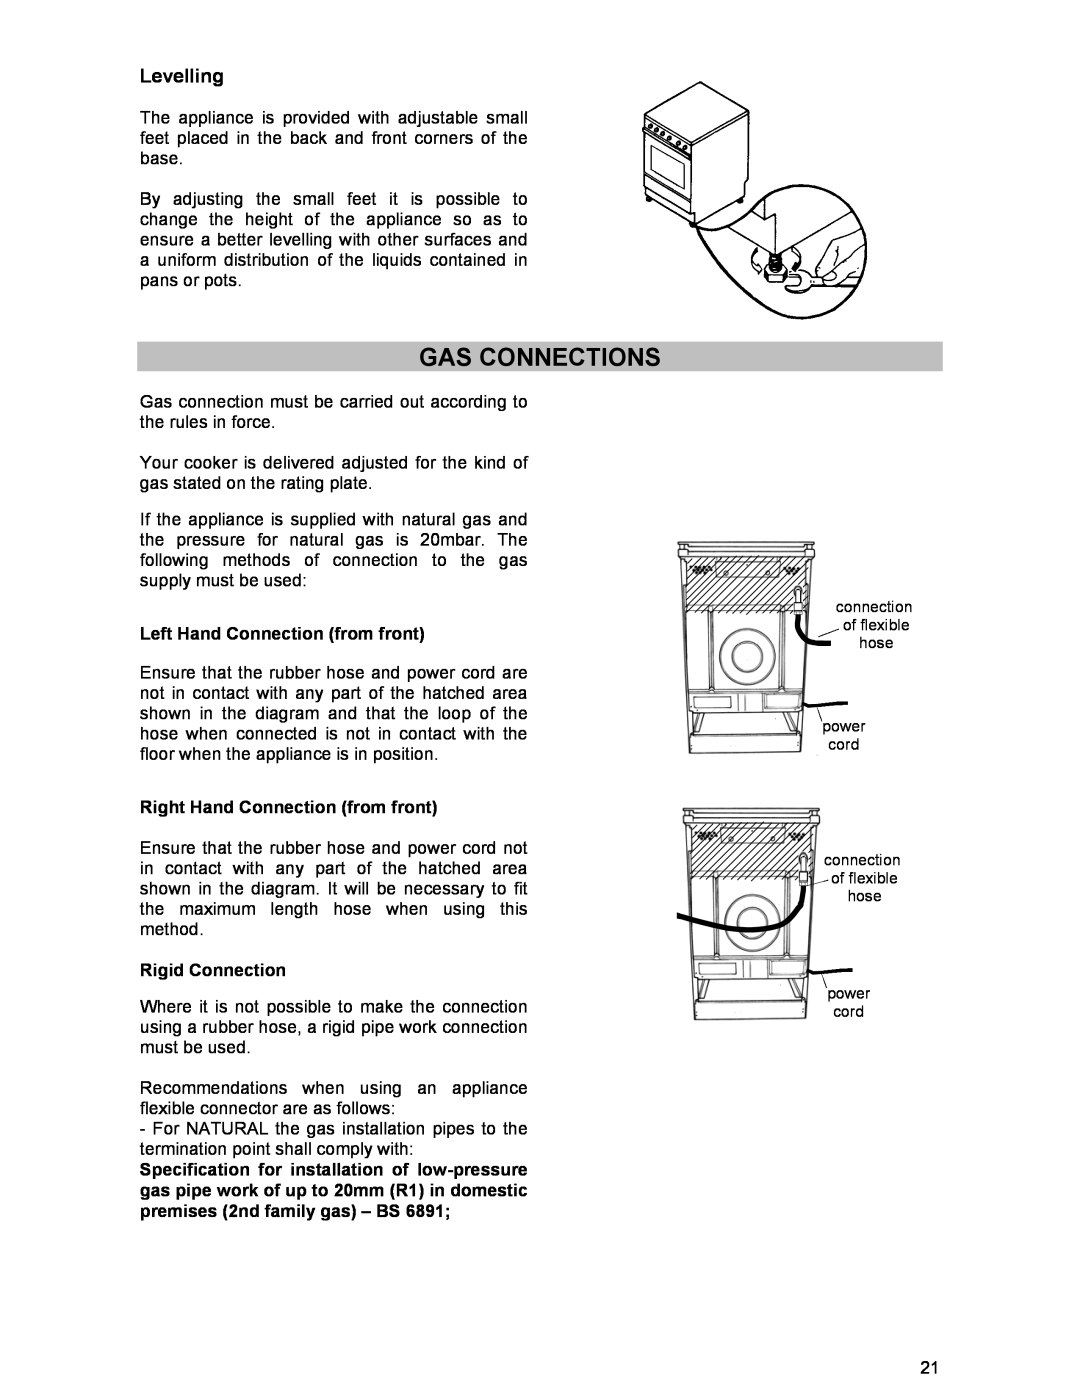 Electrolux SIG 233 manual Gas Connections, Levelling 